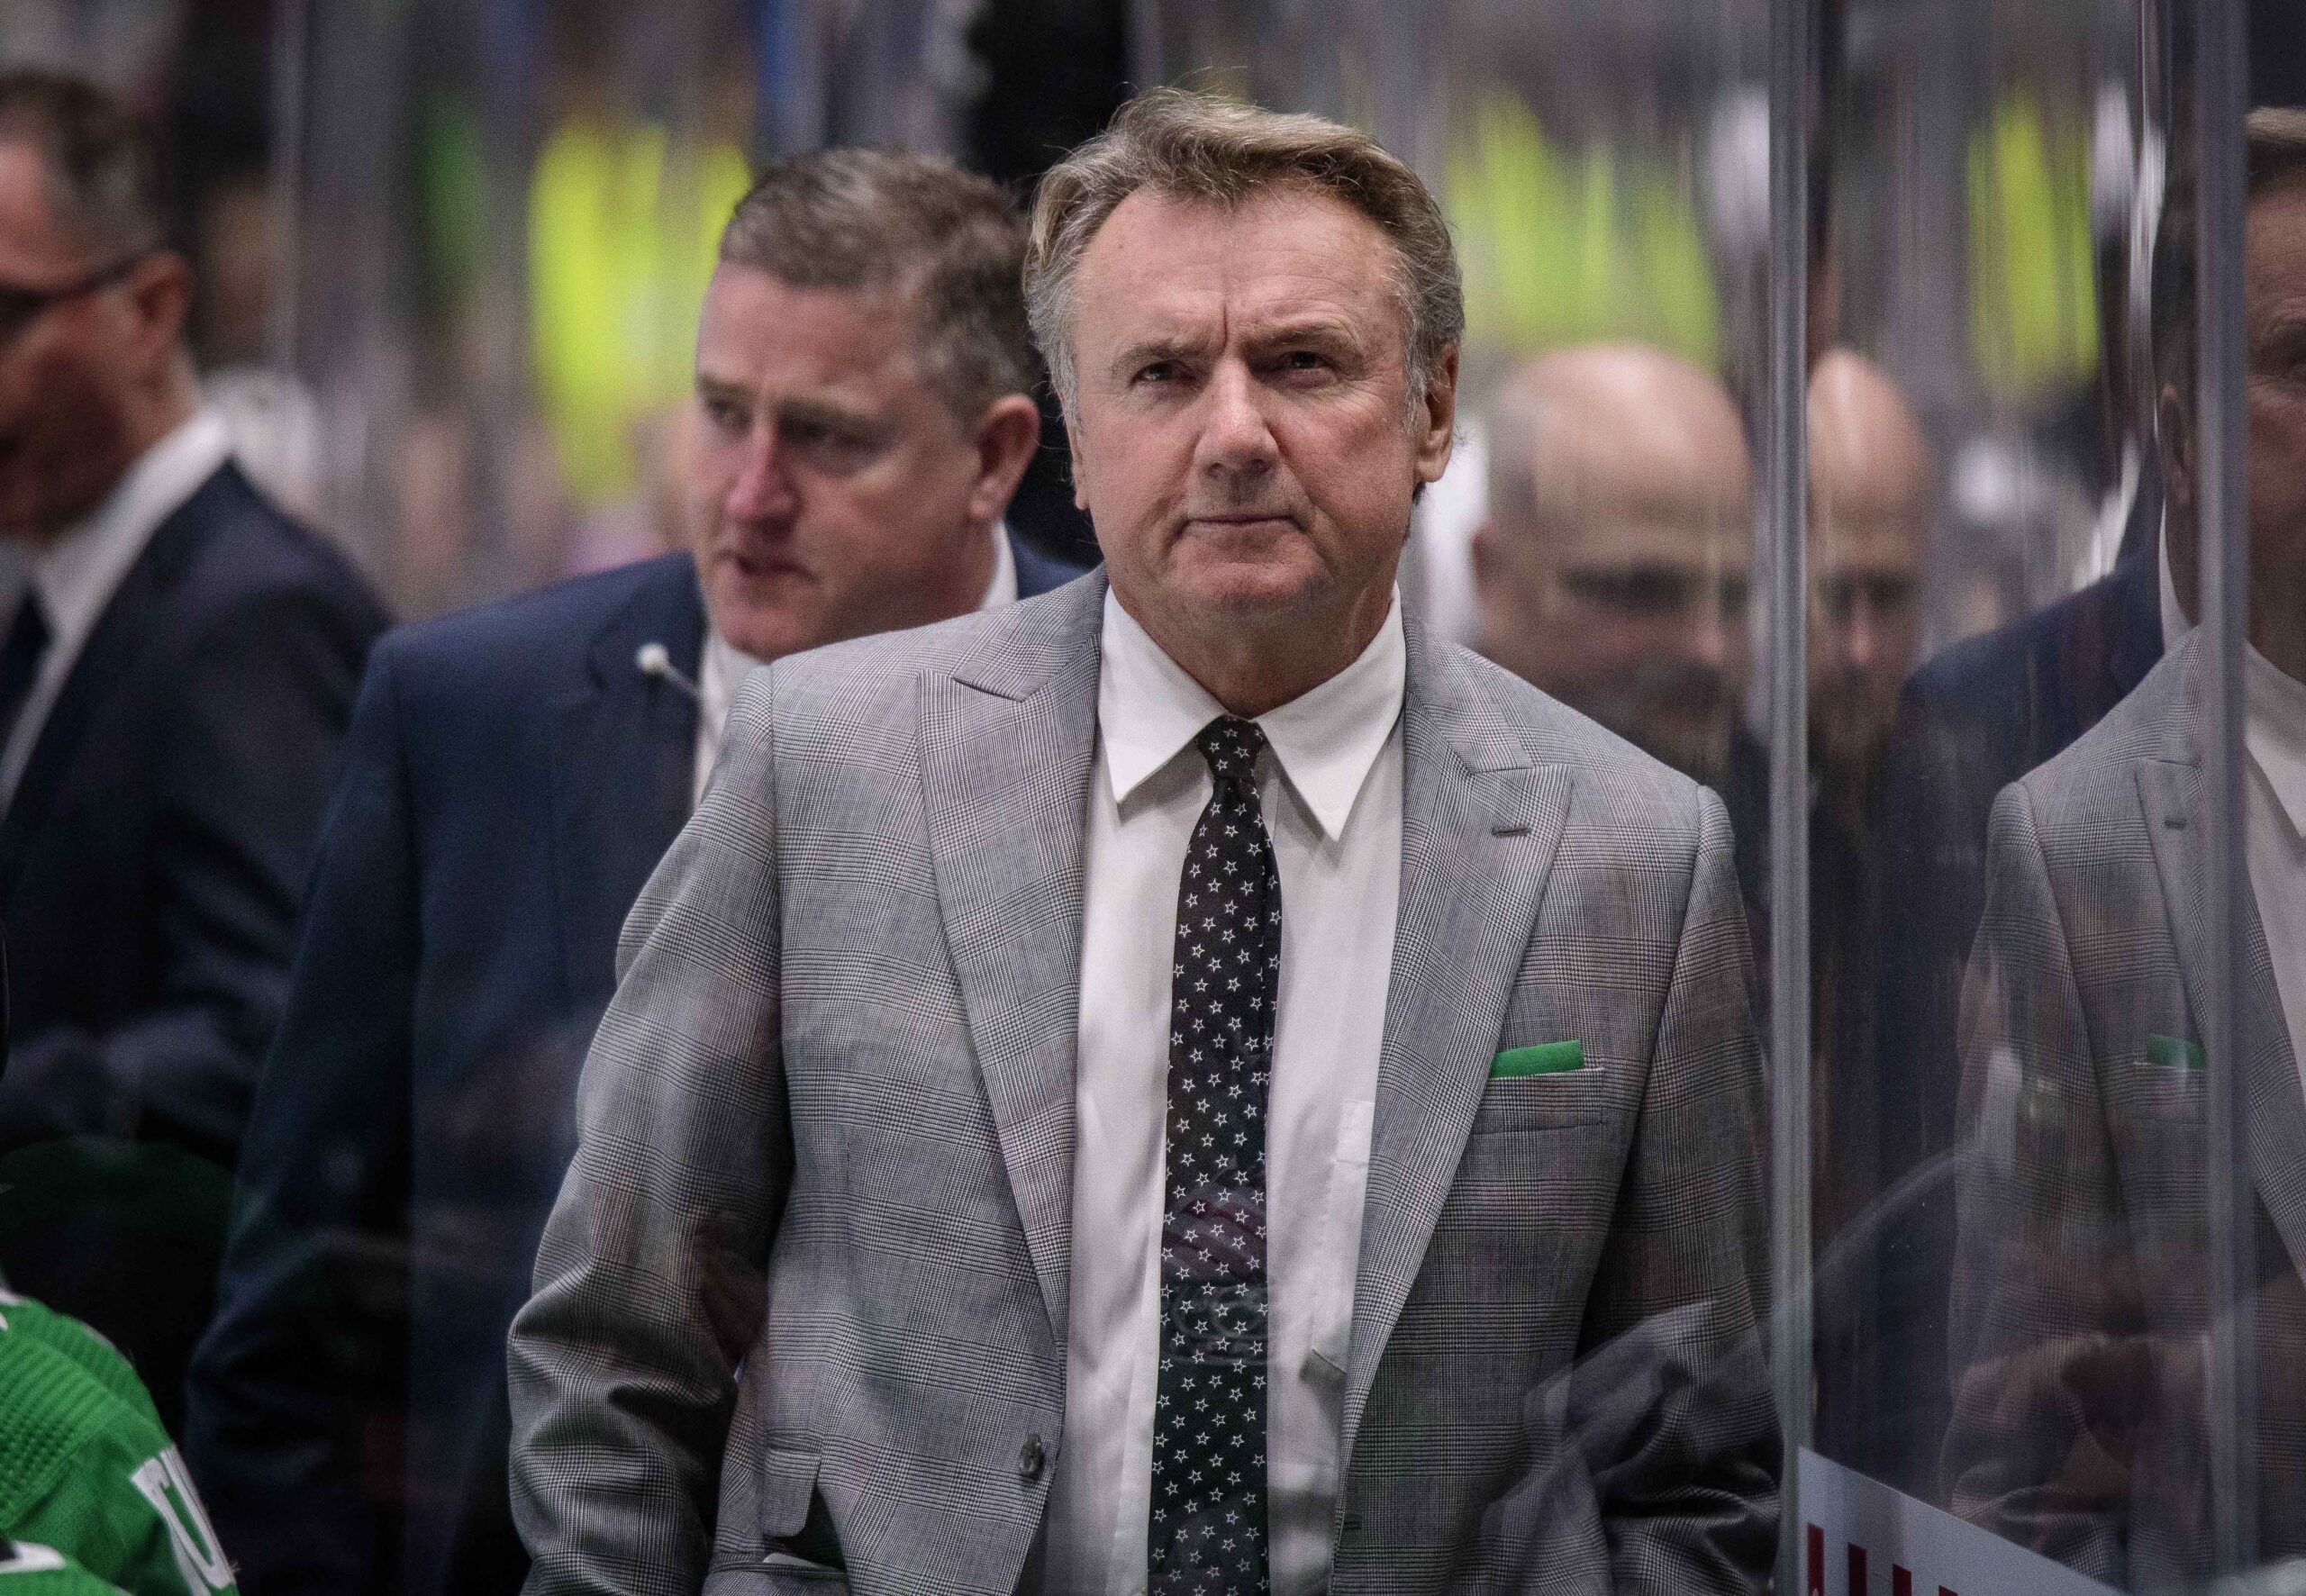 Coming off Cup run, Stars hand coach Rick Bowness 2-year contract